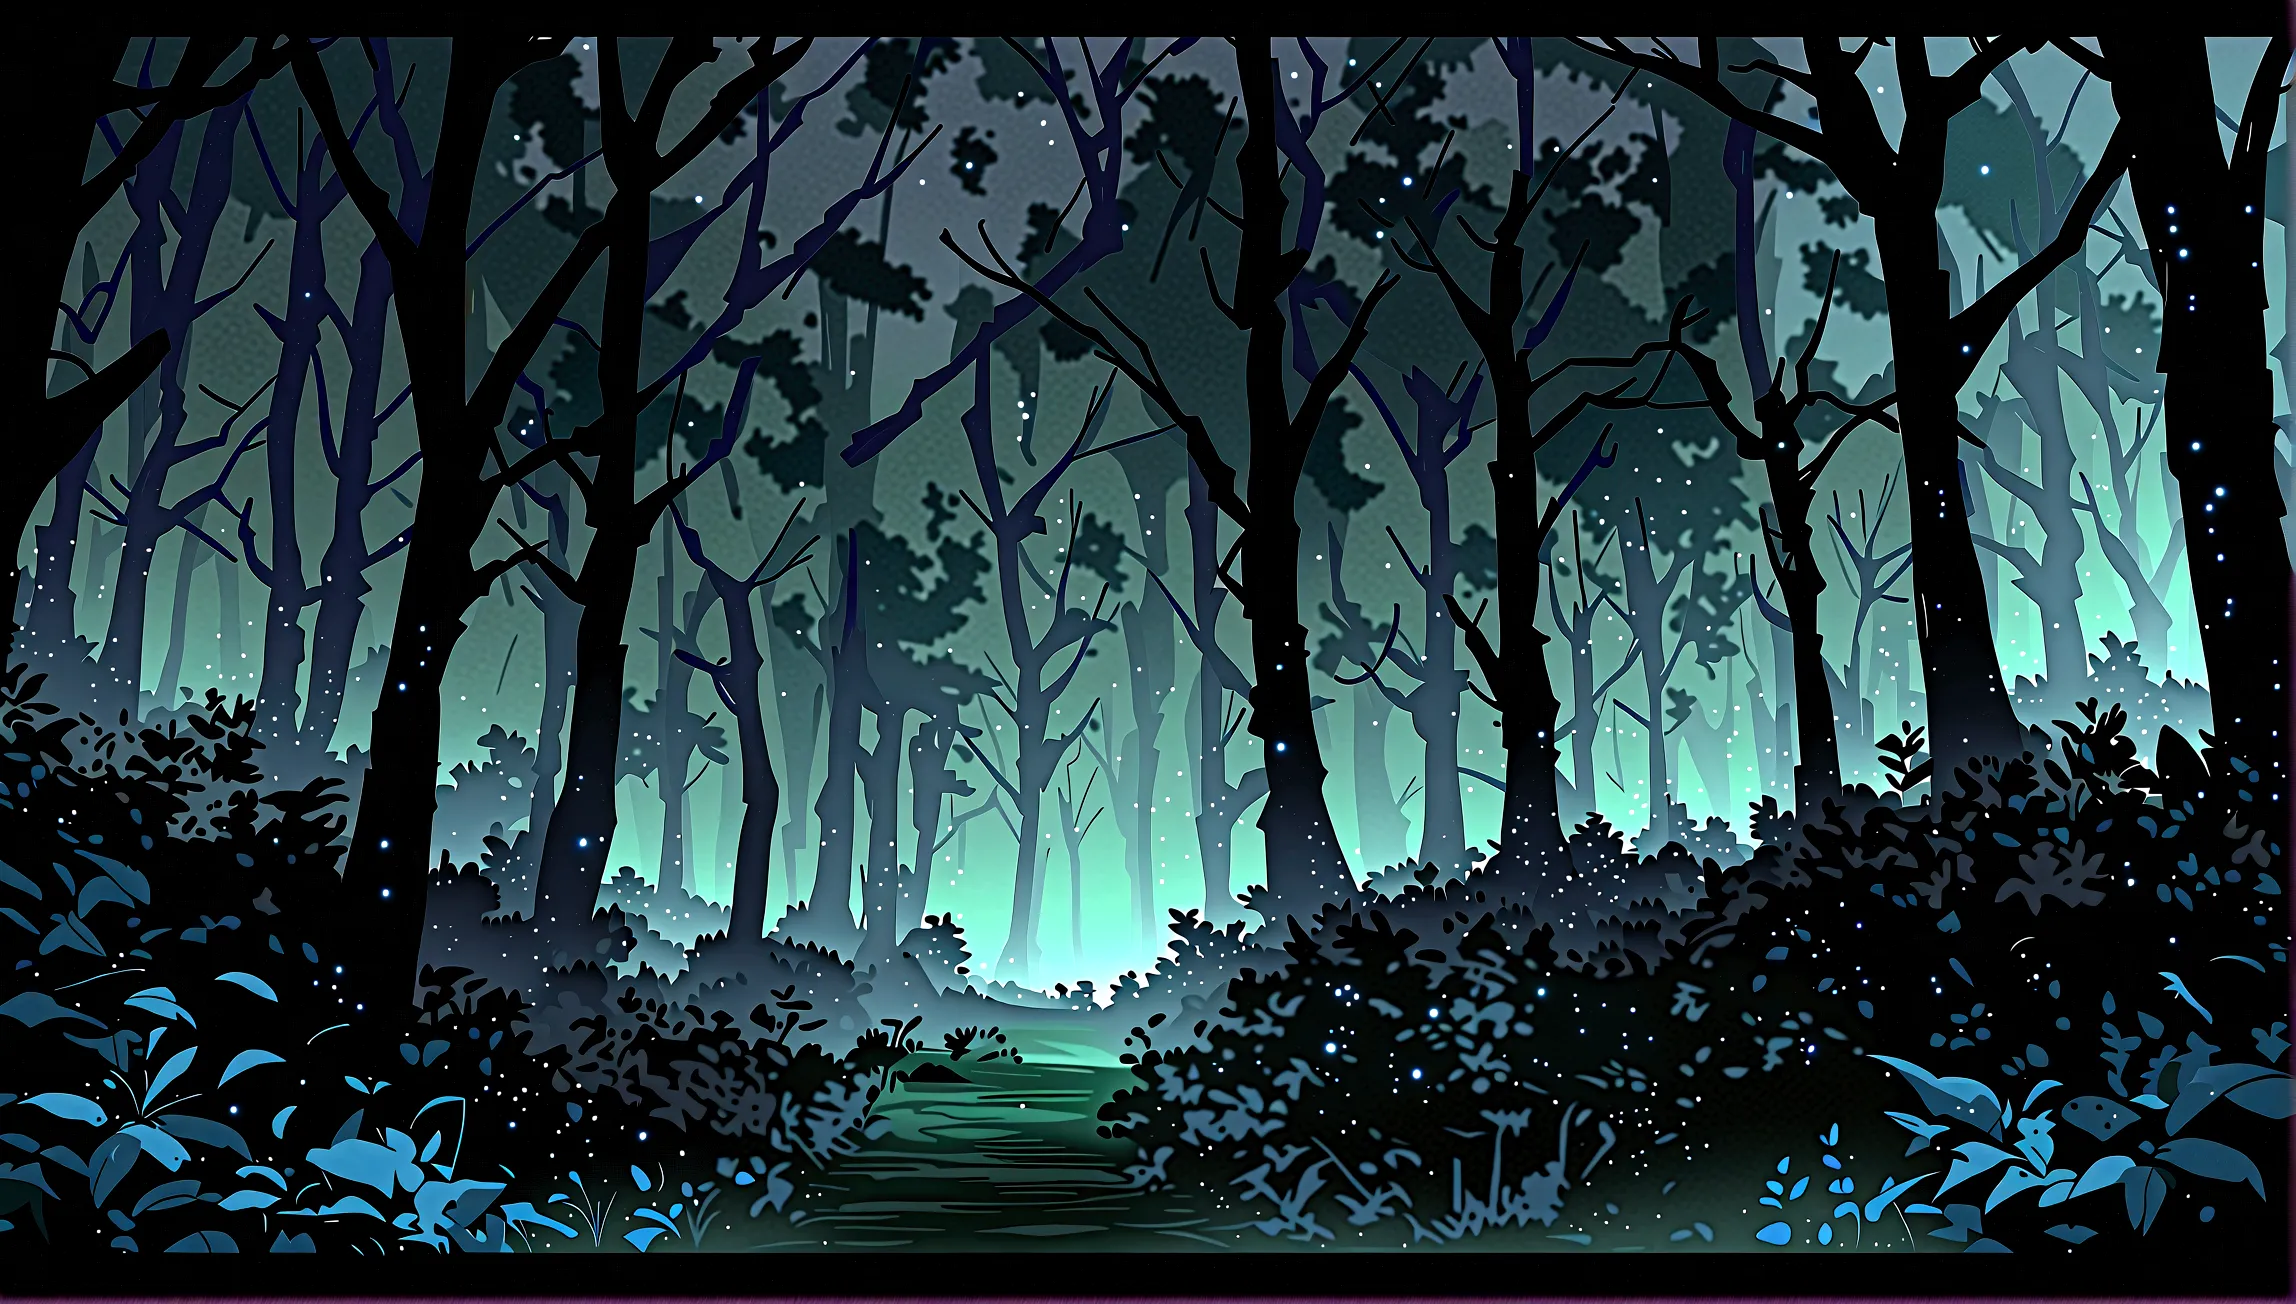 a detailed forest at night, glowing fireflies, moonlight, mist, ancient trees, gnarled roots, dense foliage, mystical atmosphere...